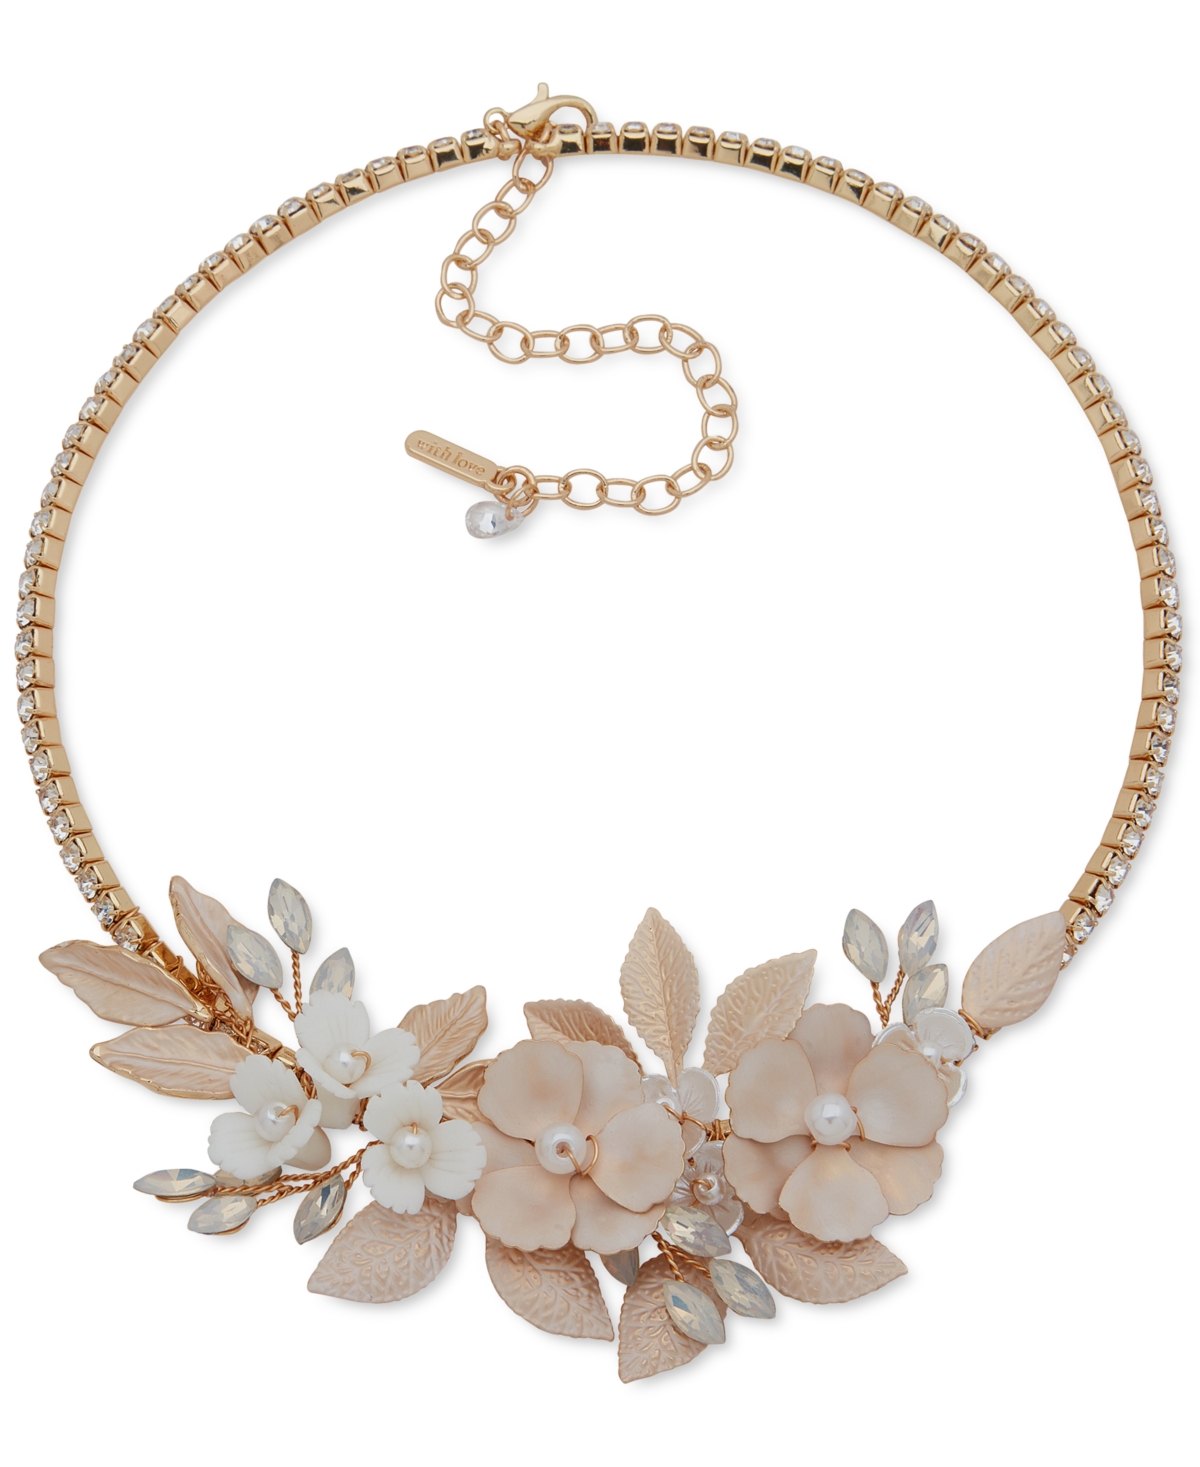 LONNA & LILLY LONNA & LILLY GOLD-TONE MIXED STONE FLOWER STATEMENT CHOKER NECKLACE, 14" + 3-1/2" EXTENDER